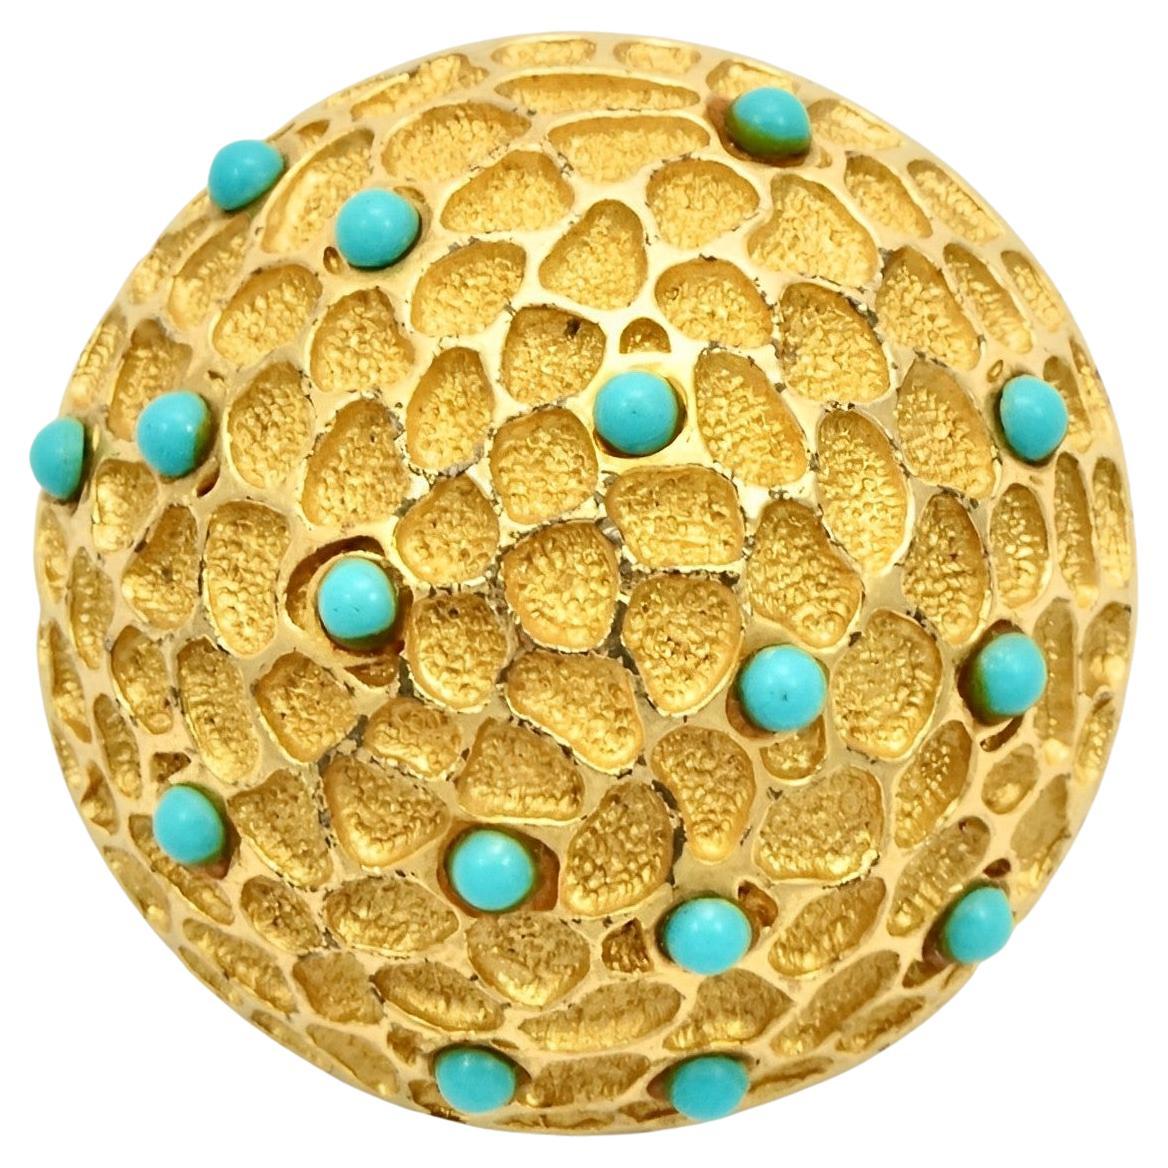 Textured Gold Plated Faux Turquoise Glass Dome Brooch circa 1970s